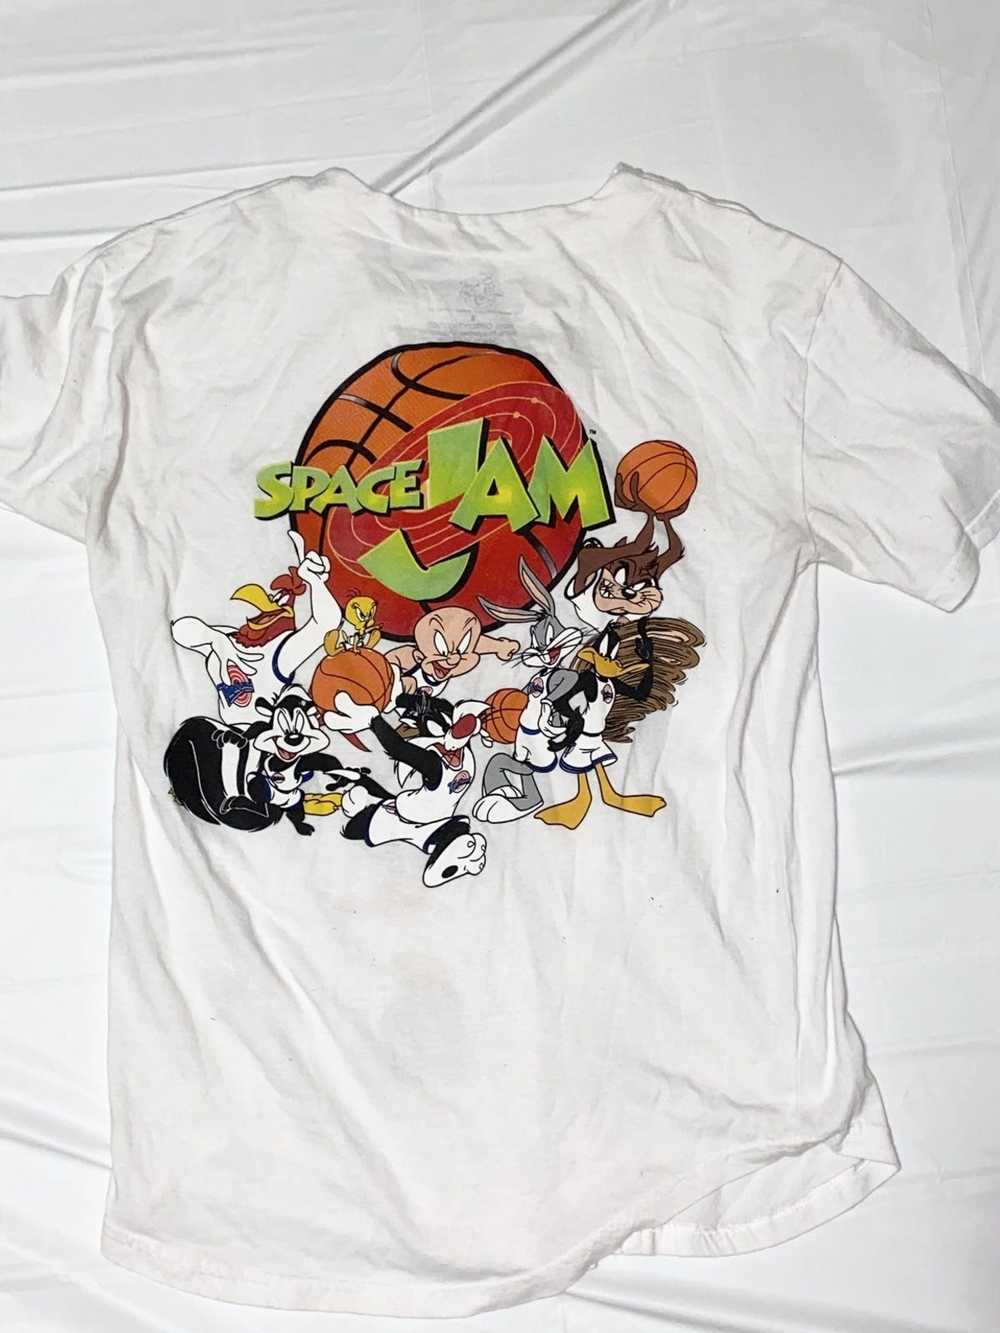 Streetwear × Vintage Button up looney tunes - image 2